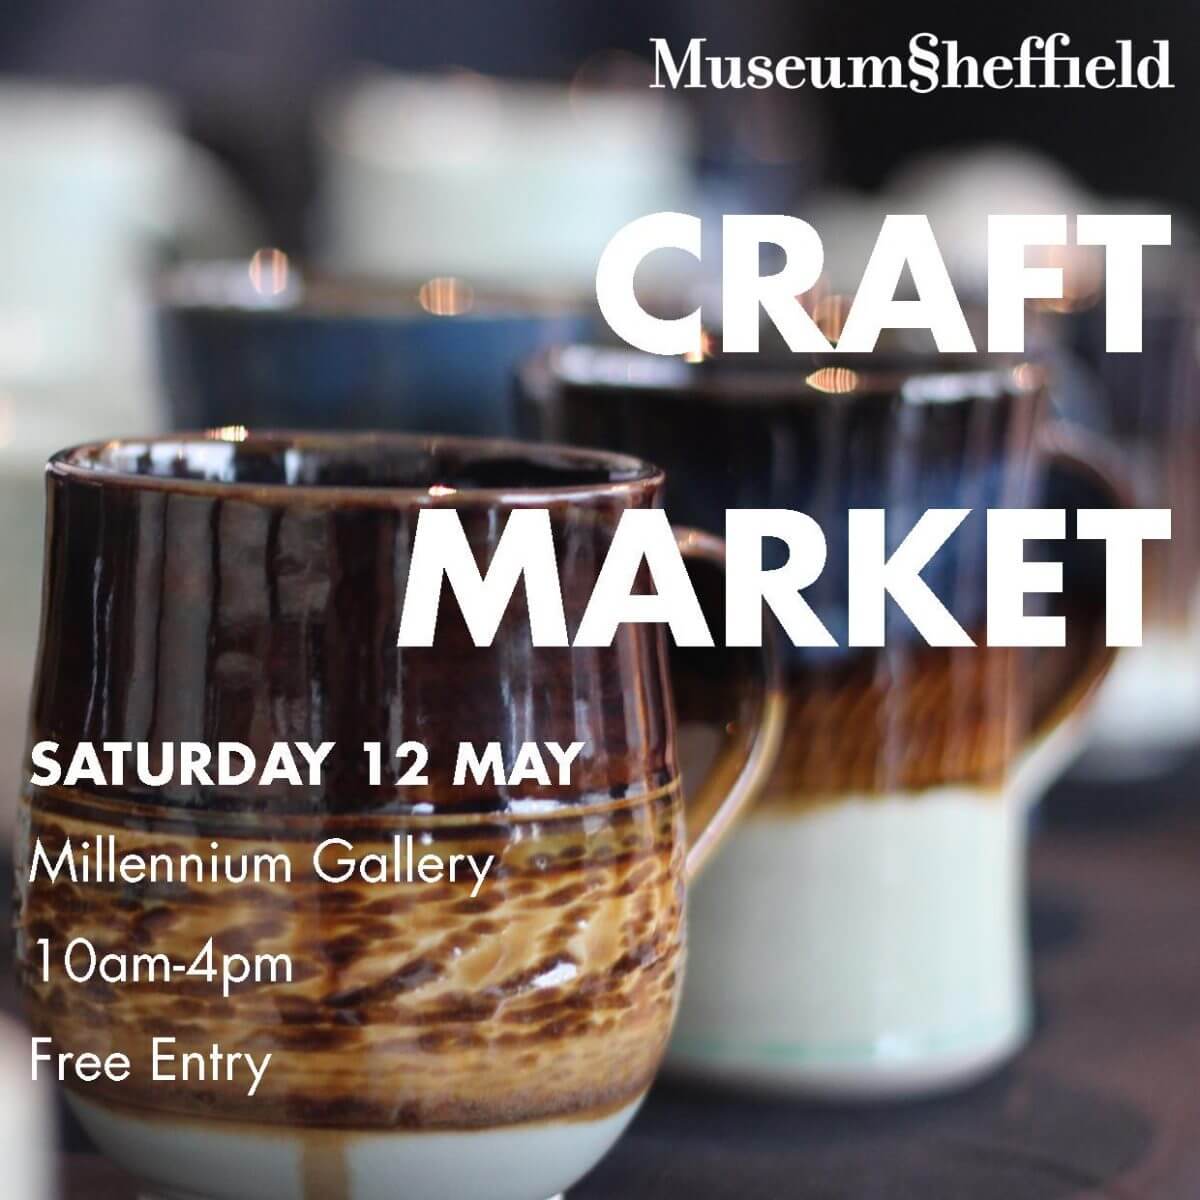 Kanzashi Artwork and Textile Jewellery | Millennium Gallery Craft Market May 2018

12th May, 2018

Time: 11:00 to 16:00

Address: Millennium Gallery, Arundel Gate, Sheffield, S1 2PP